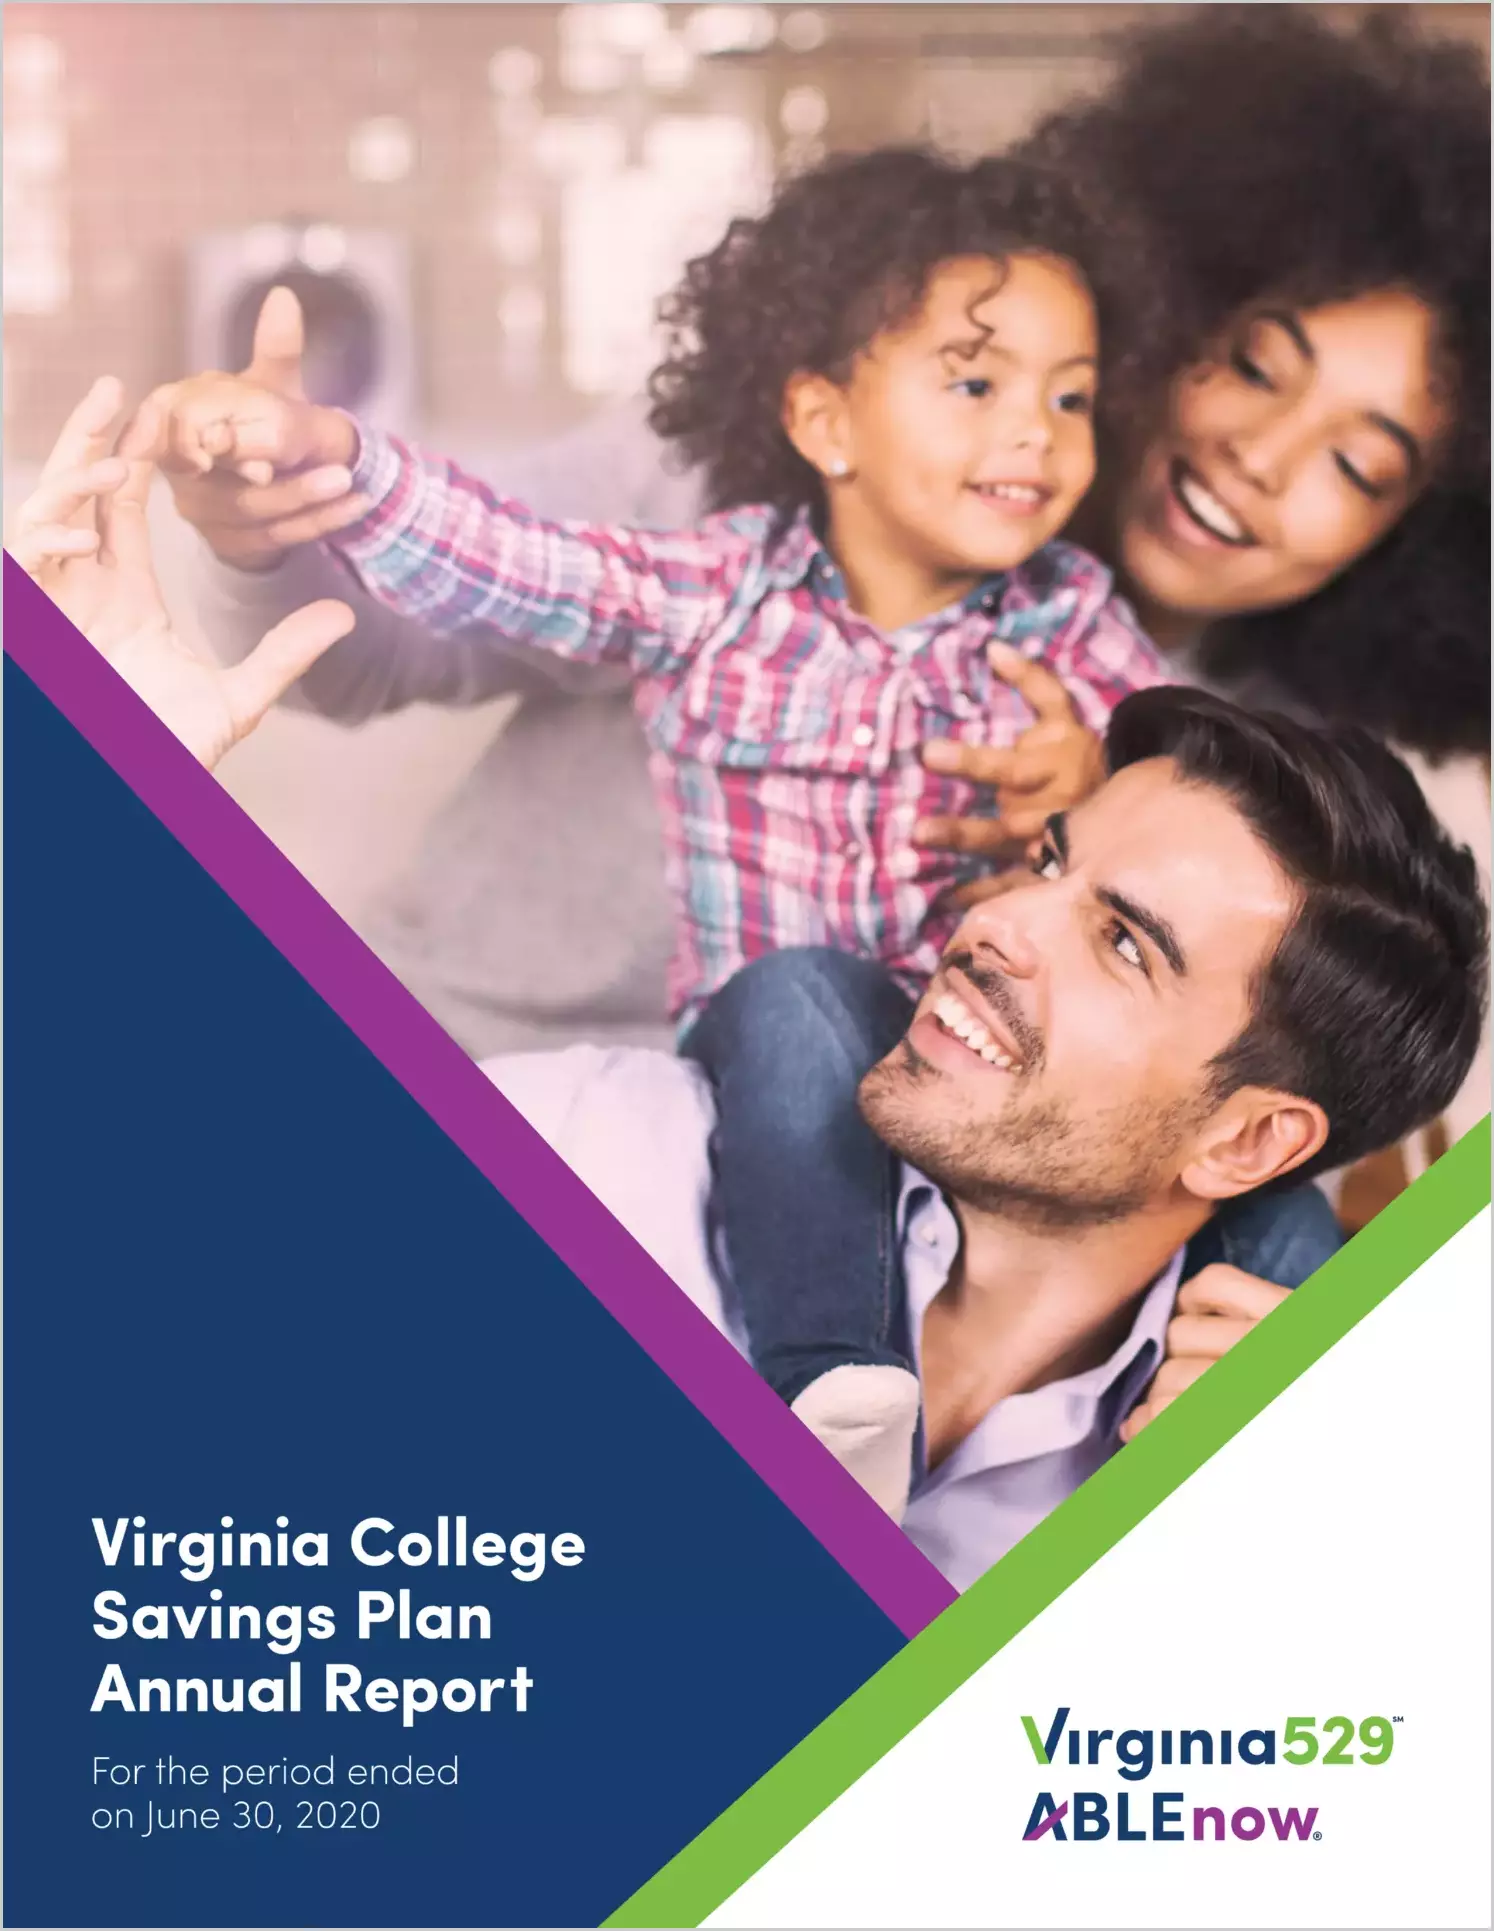 Virginia College Savings Plan Financial Statements & Internal Control Report for the year ended June 30, 2020